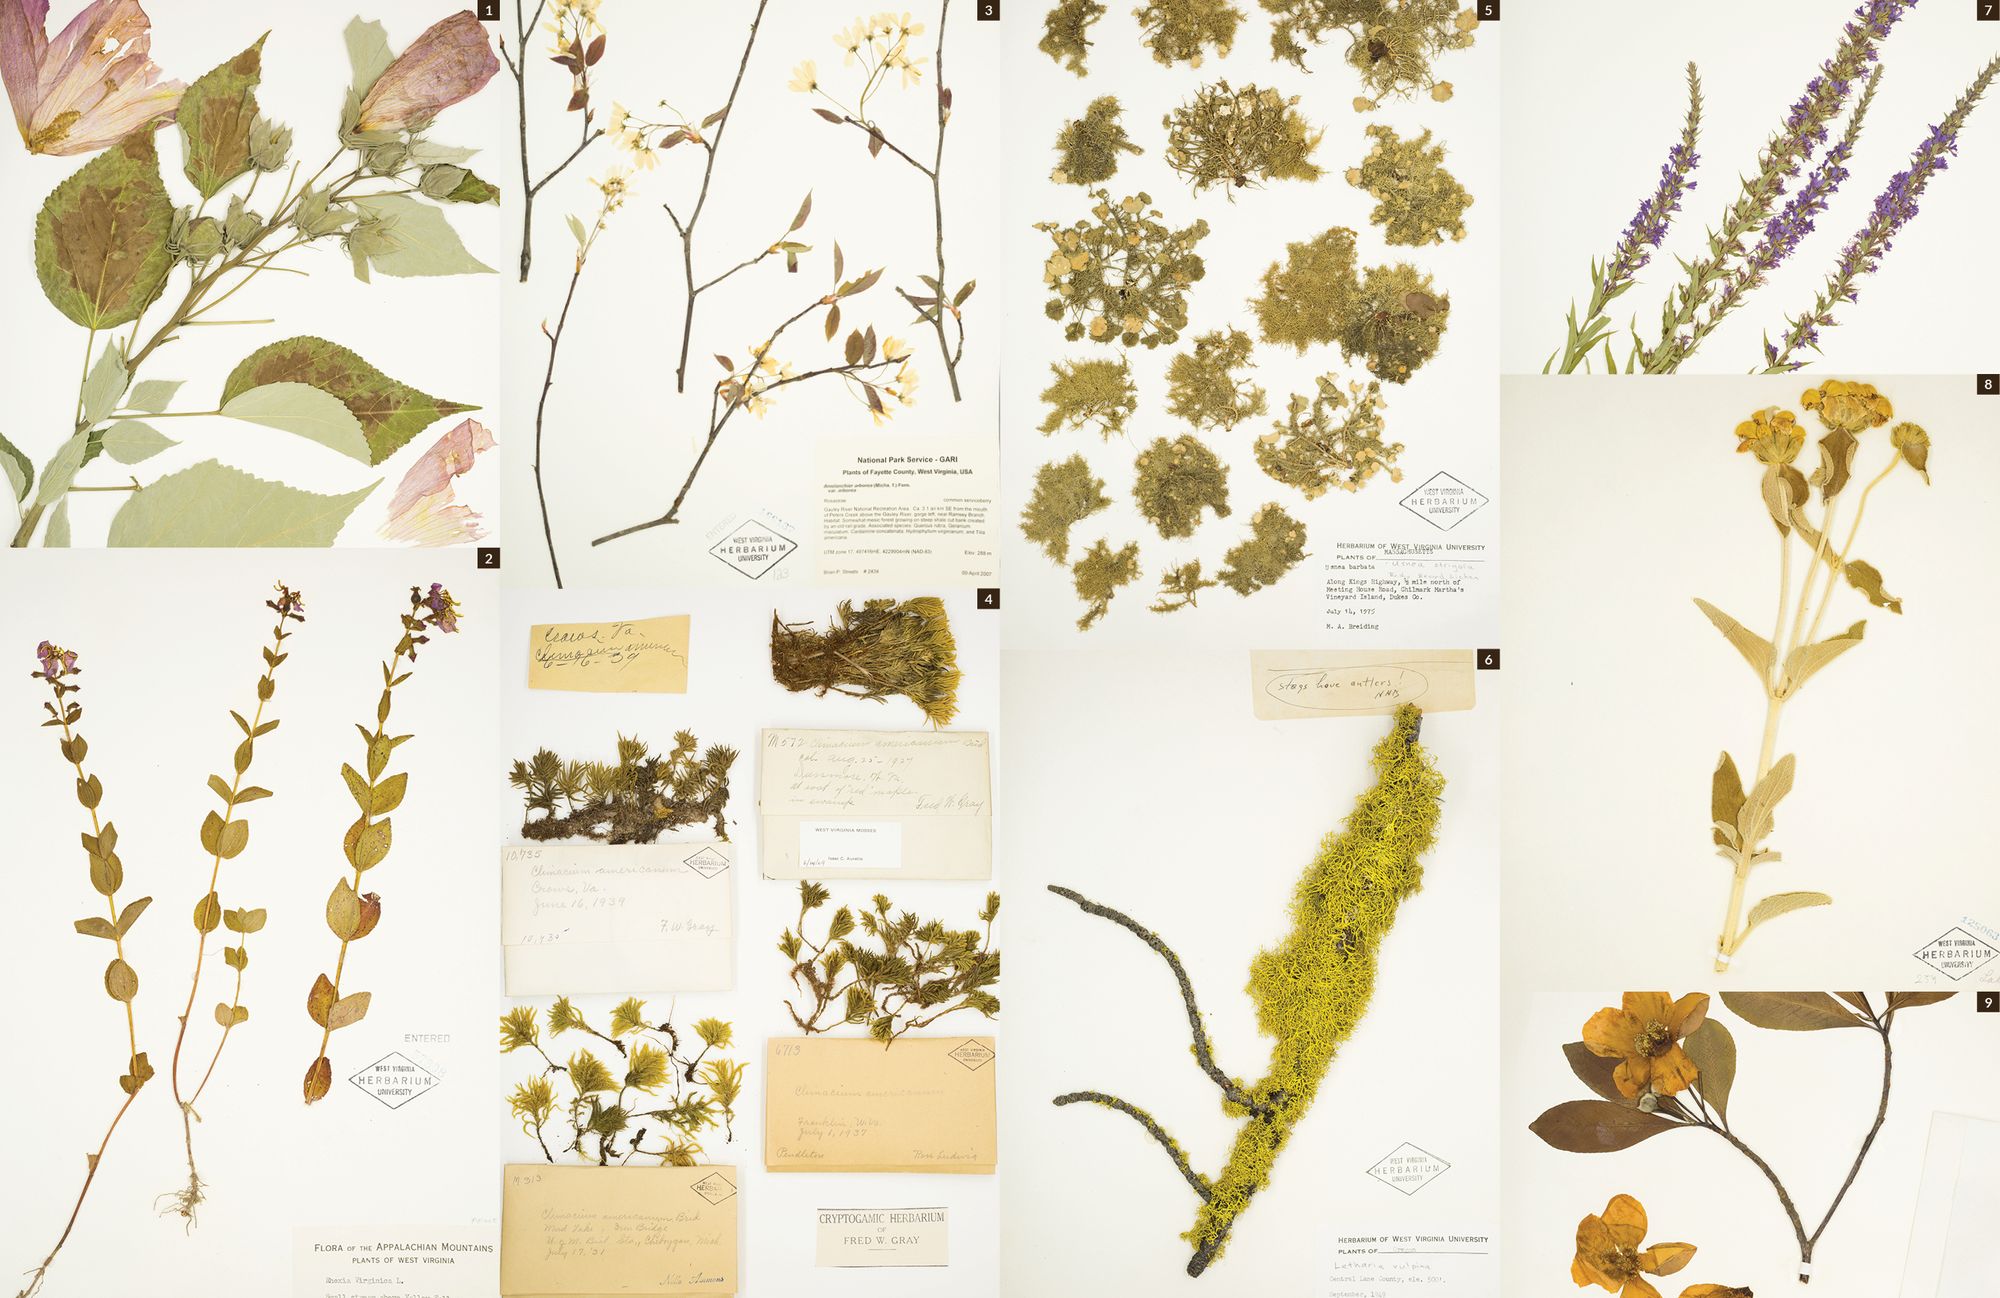 Plants in the herbarium collection.